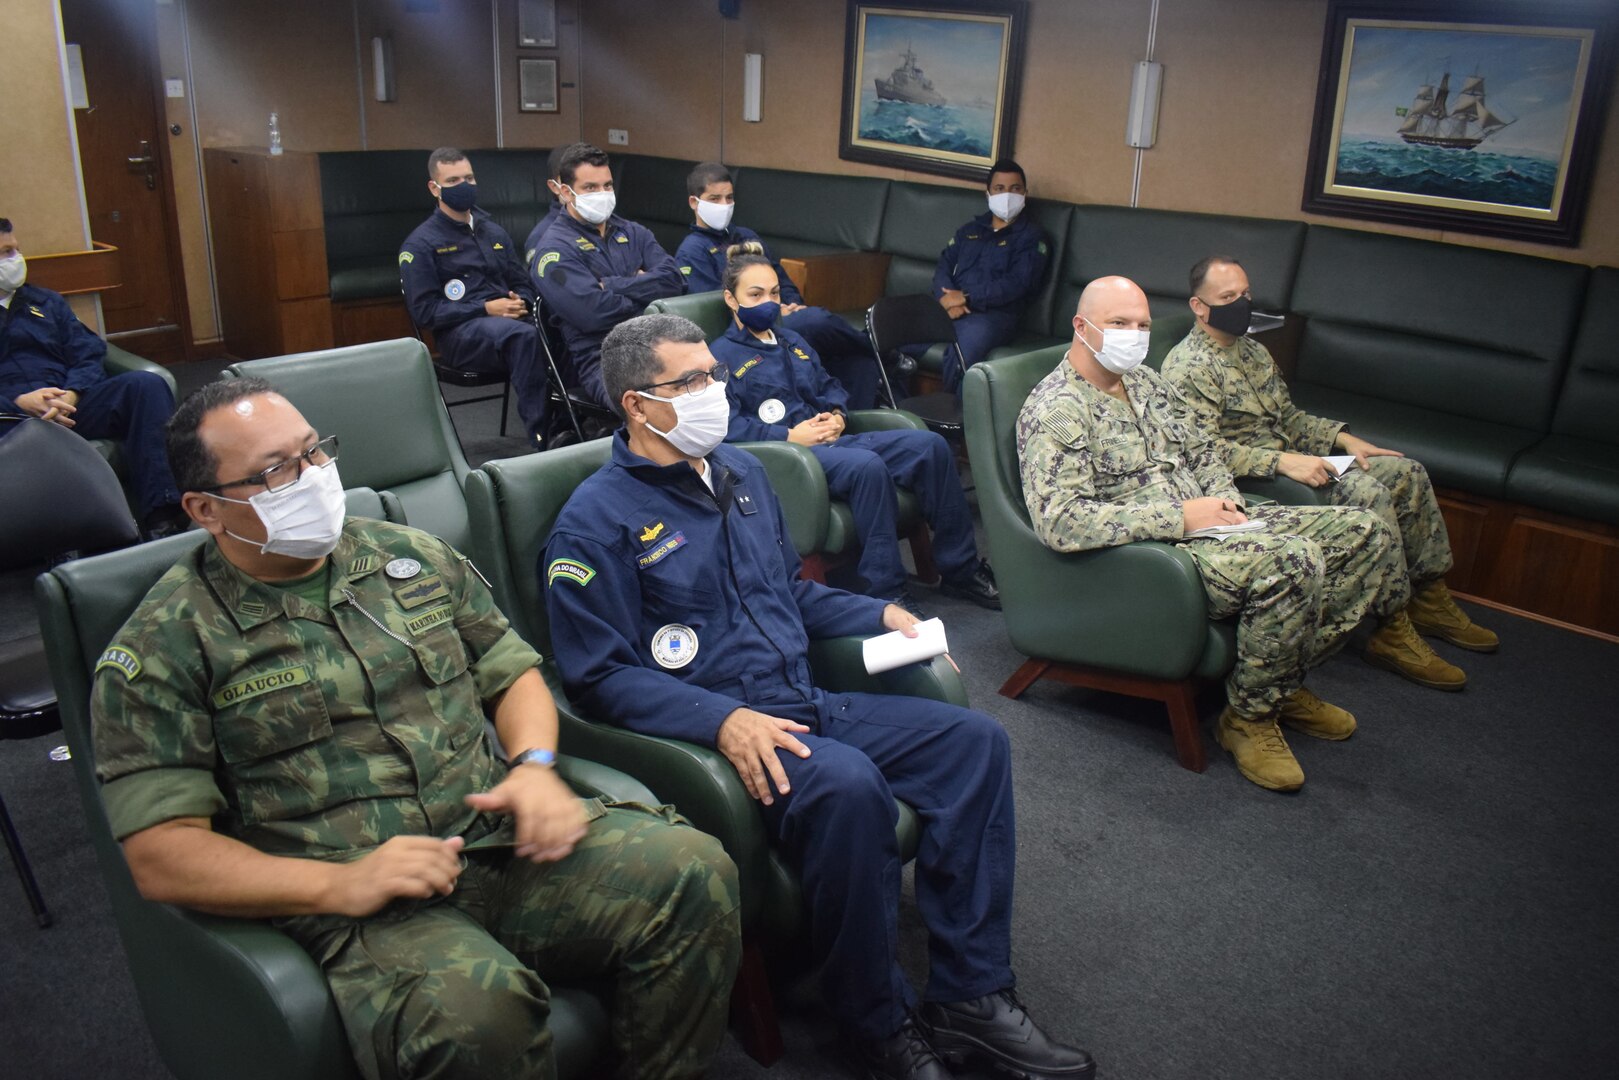 Military personnel listen to a briefing.